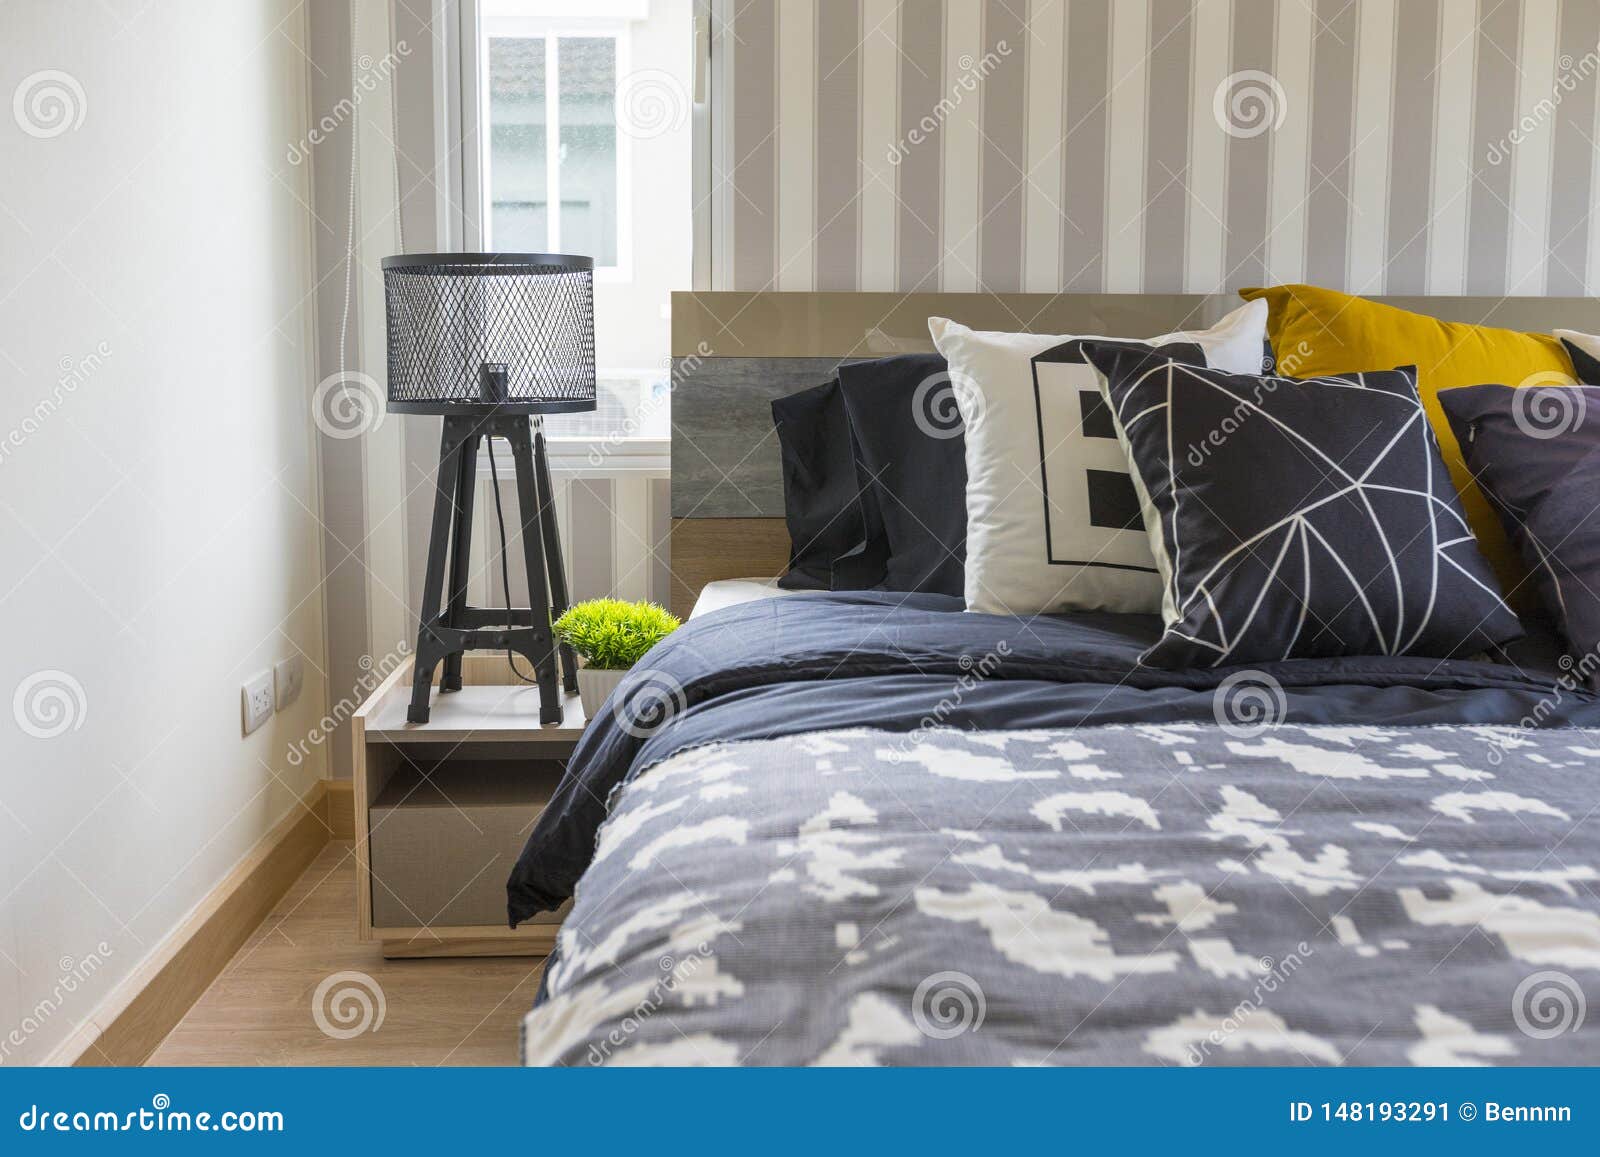 King Size Bed With Yellow Pillow In Modern Bedroom Stock Image